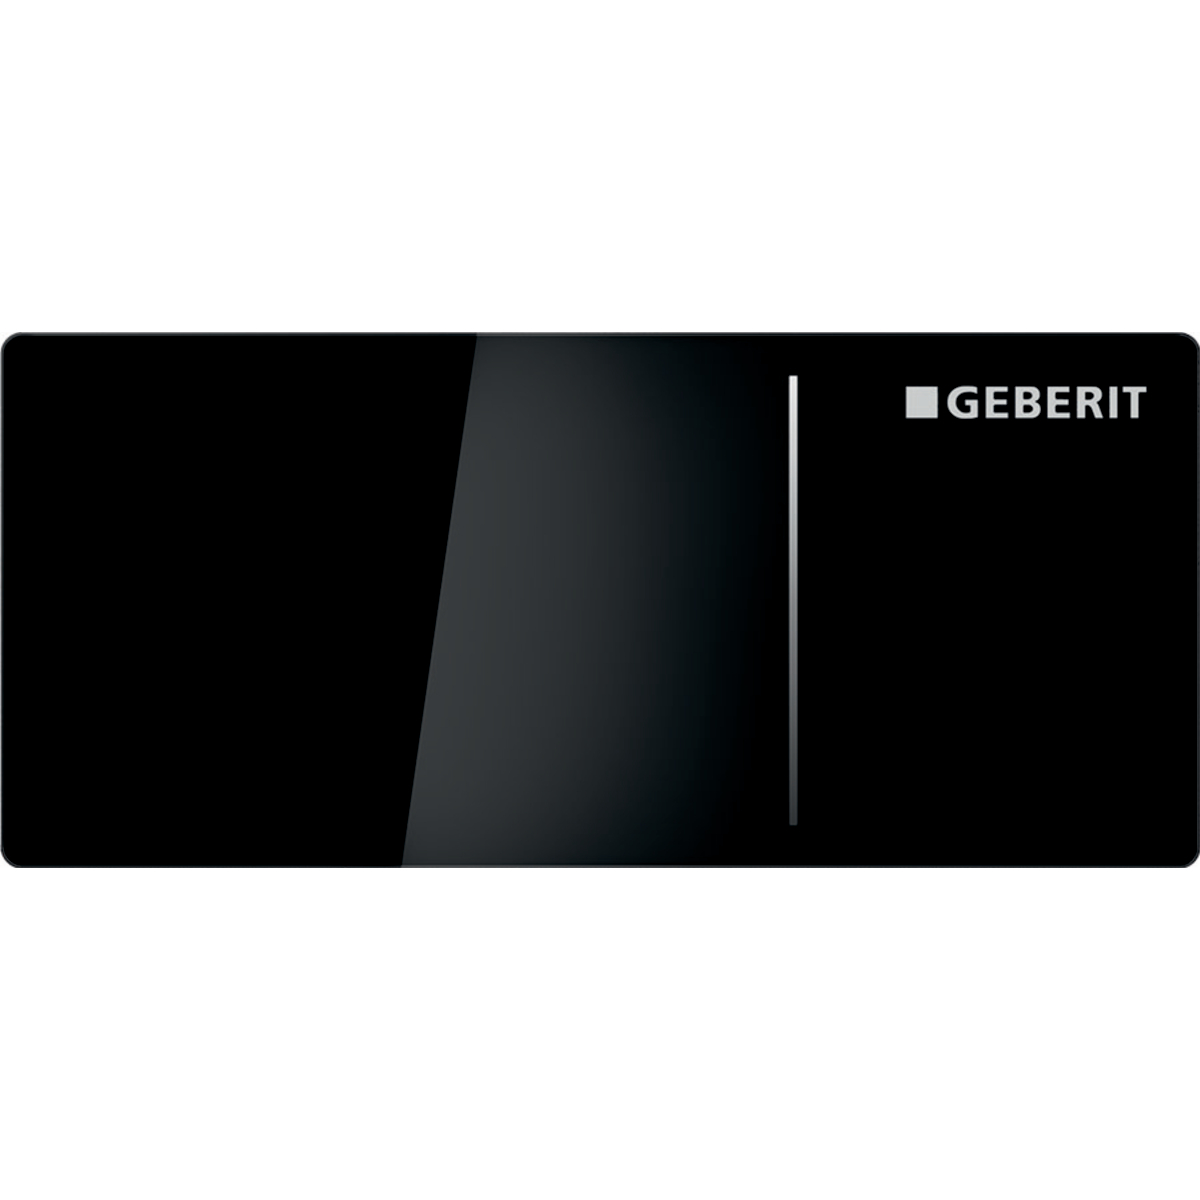 Geberit 115.630.SJ.1 Remote Flush Actuation Type 70 for Dual Flush, for Sigma Concealed Cistern 12 Cm - Black Glass